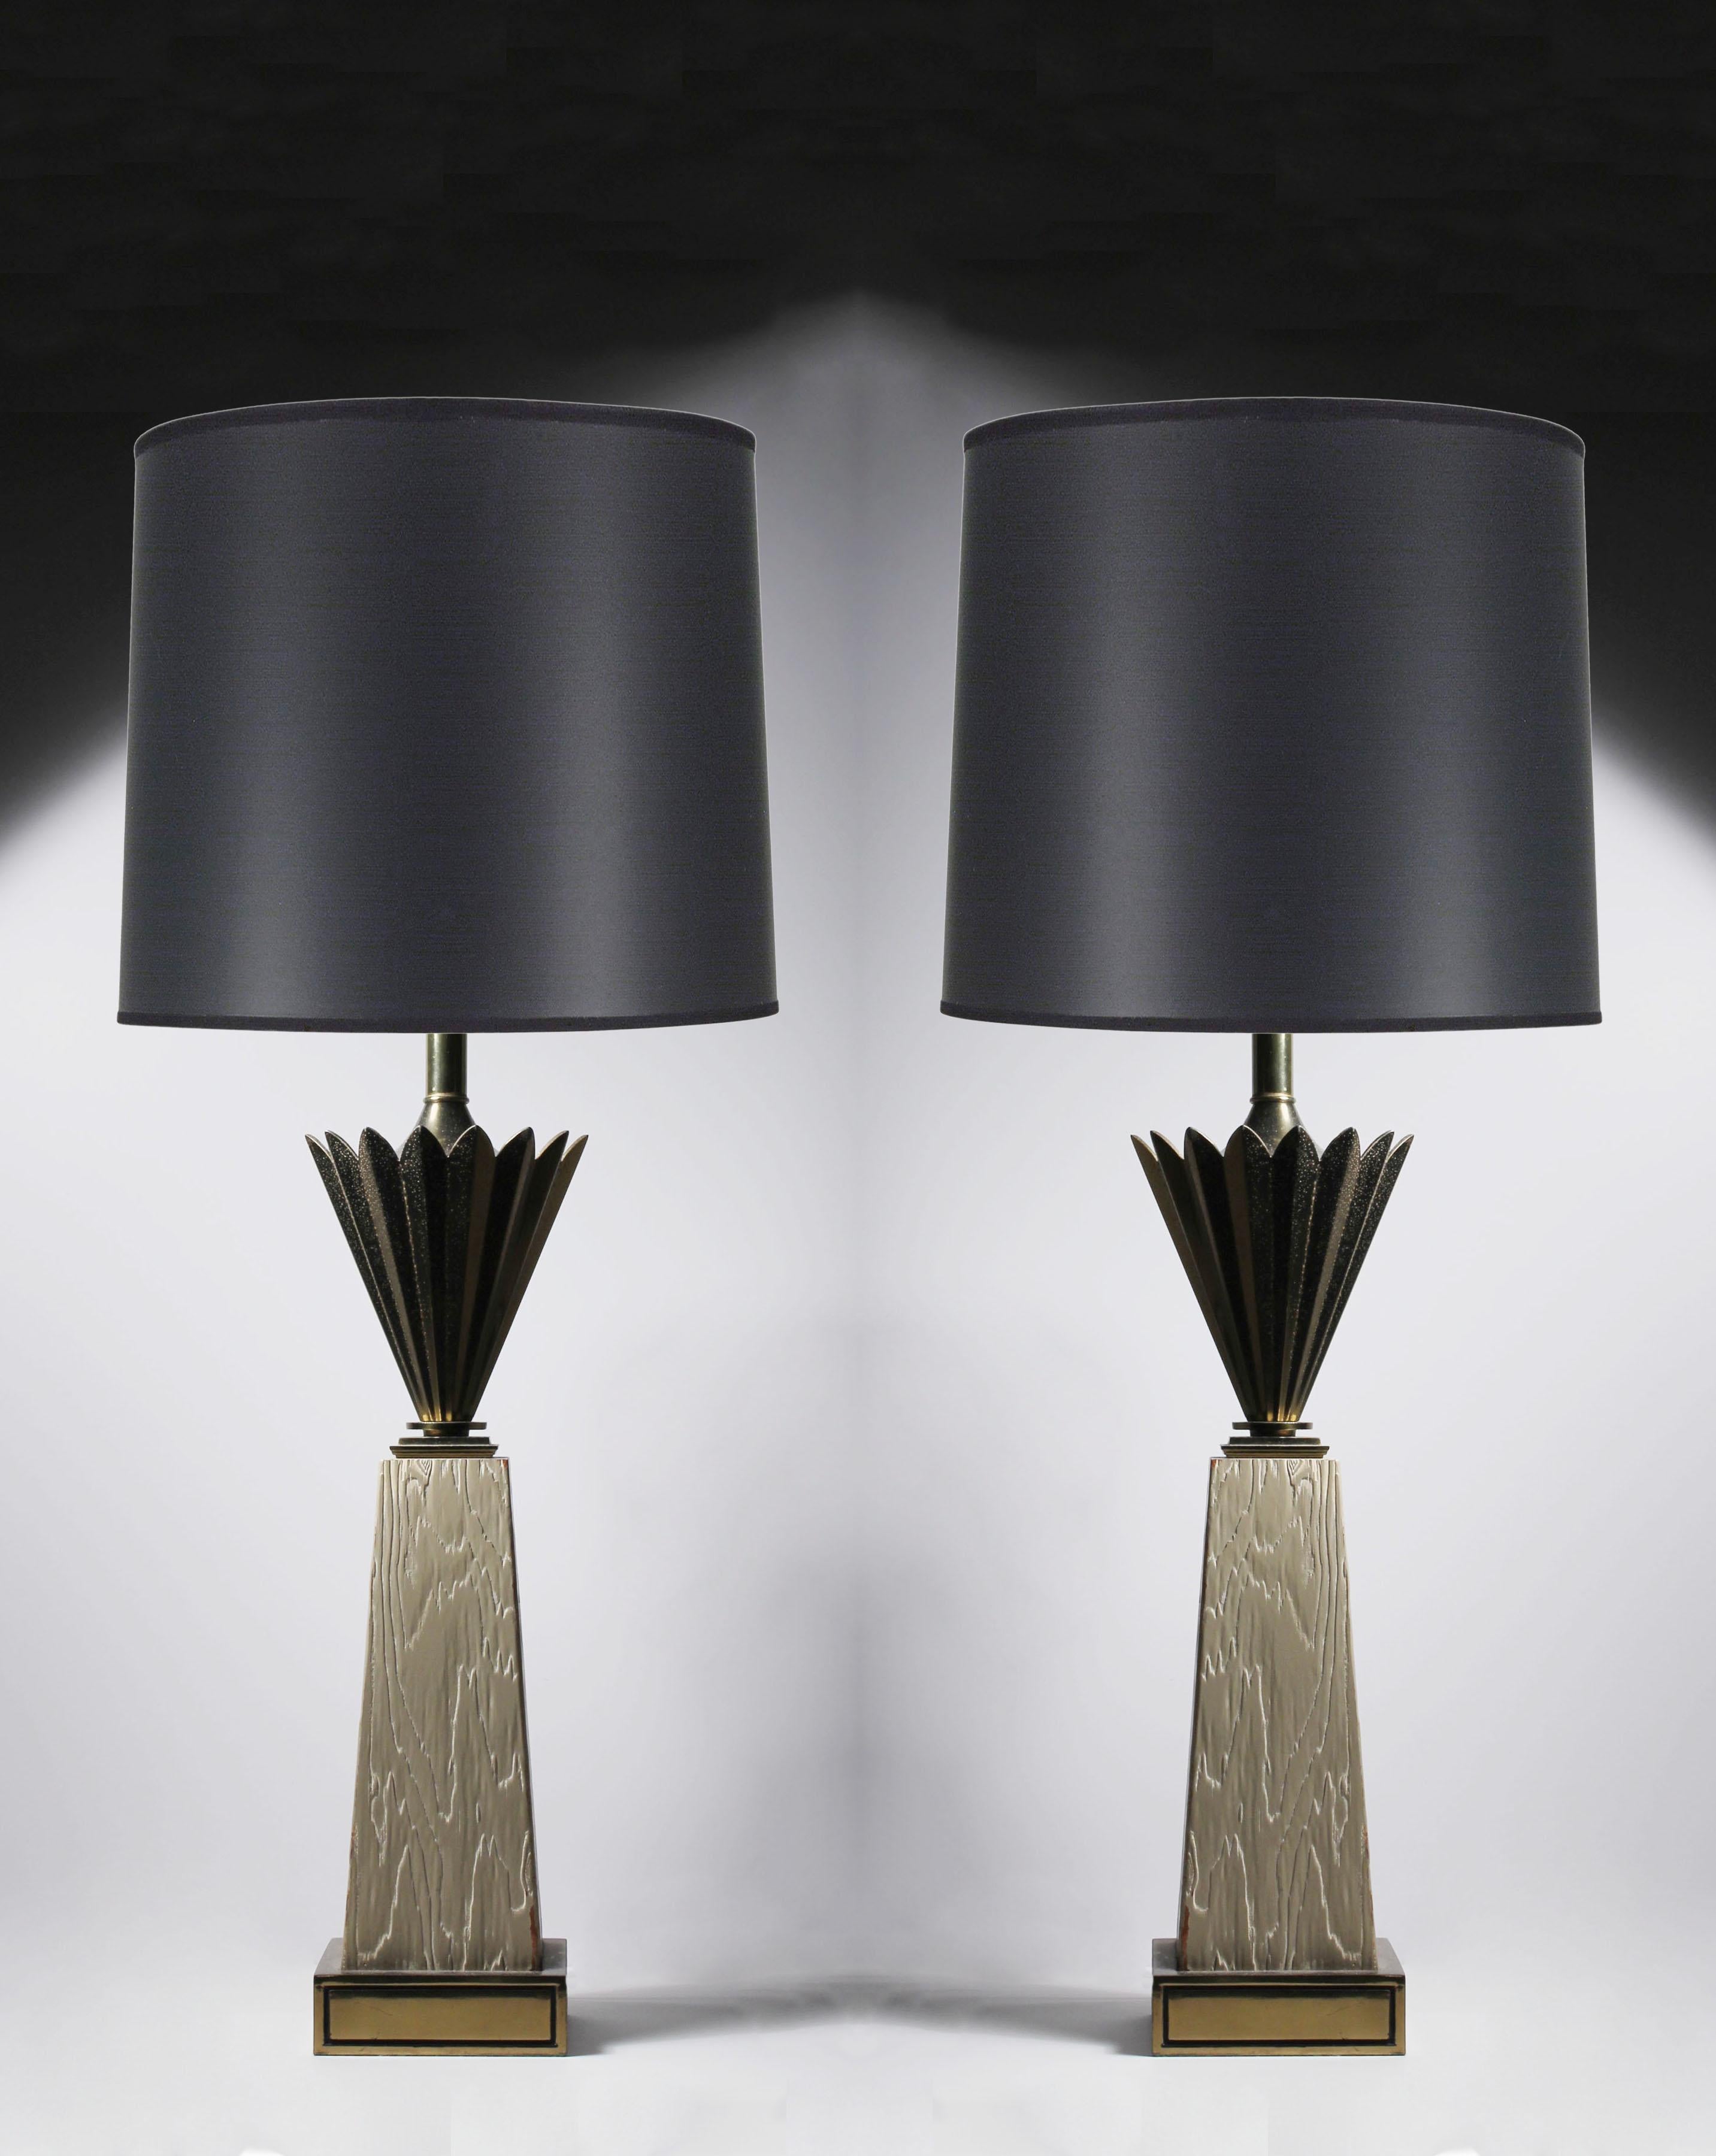 Pair of Stiffel table lamps (wood bases) with deco Hollywood Regency style form
glass diffusers included.  In the manner of Tommi Parzinger

Measures: 31.75